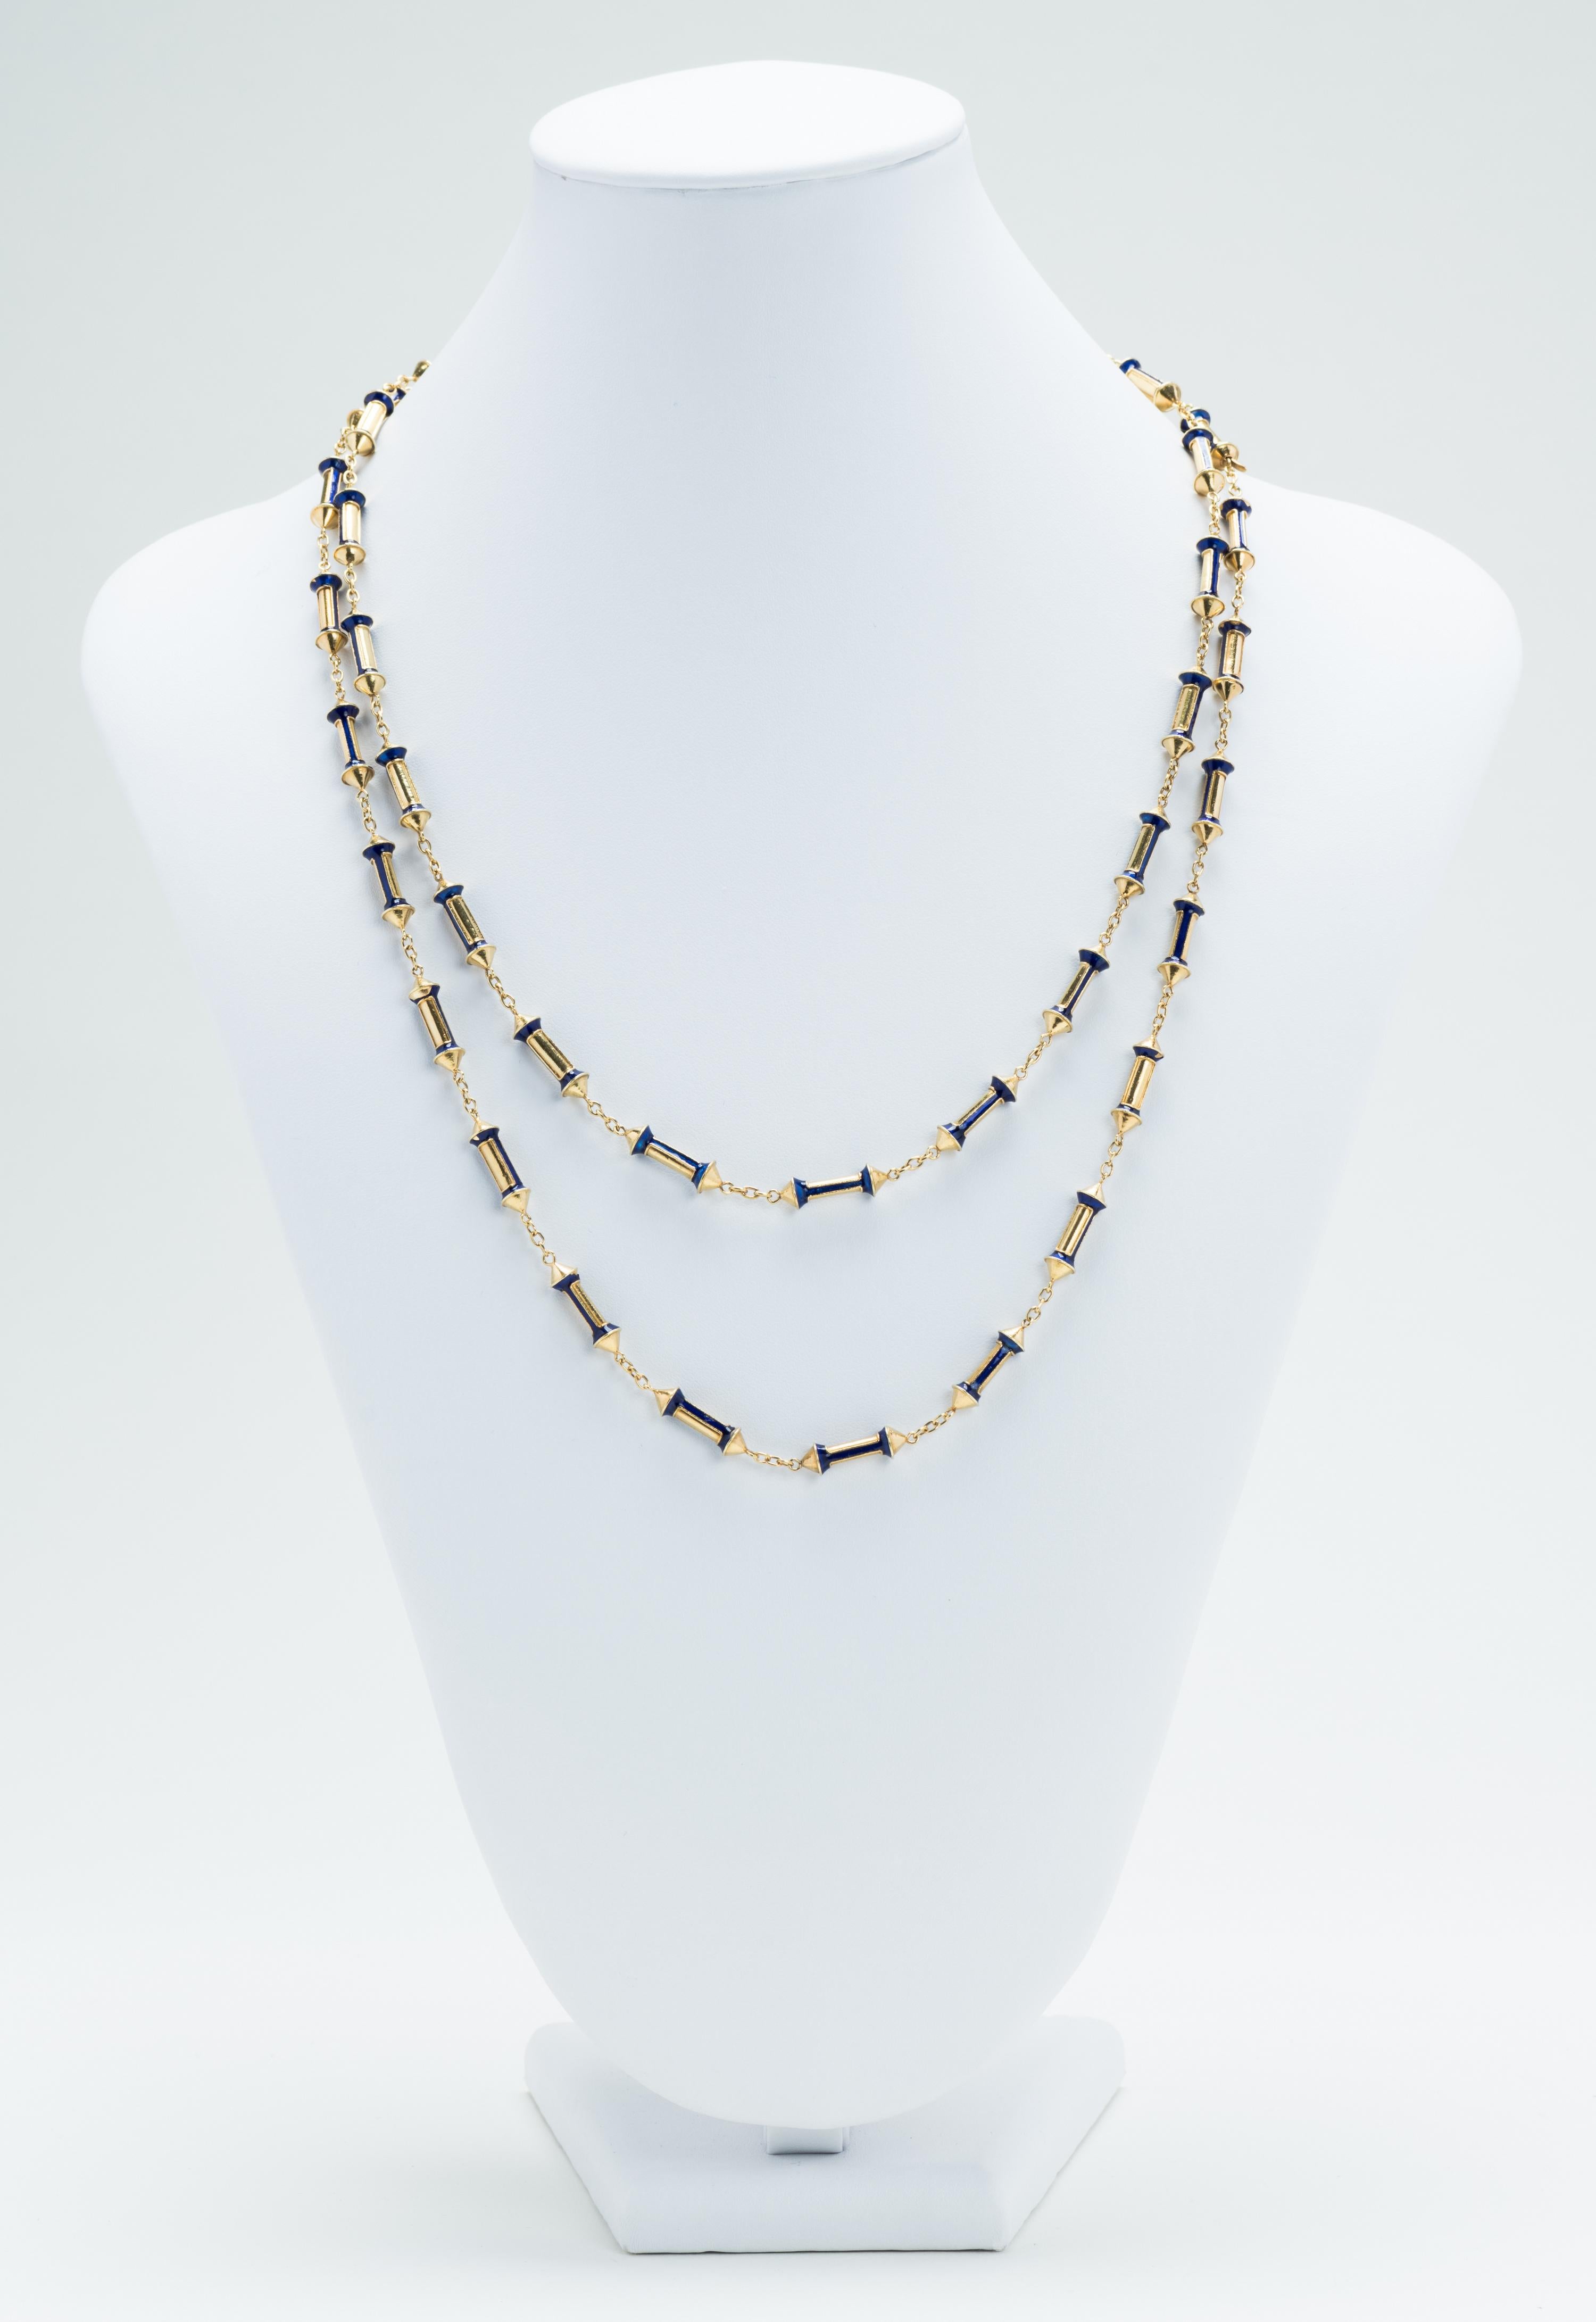 The 18 karat gold and blue enamel necklace has tubular links inset with blue enamel.  Each link is connected by a small oval linked chain.  The necklace detaches and becomes two 11 1/2” necklaces.  There is an 18 karat gold stamp on each clasp.